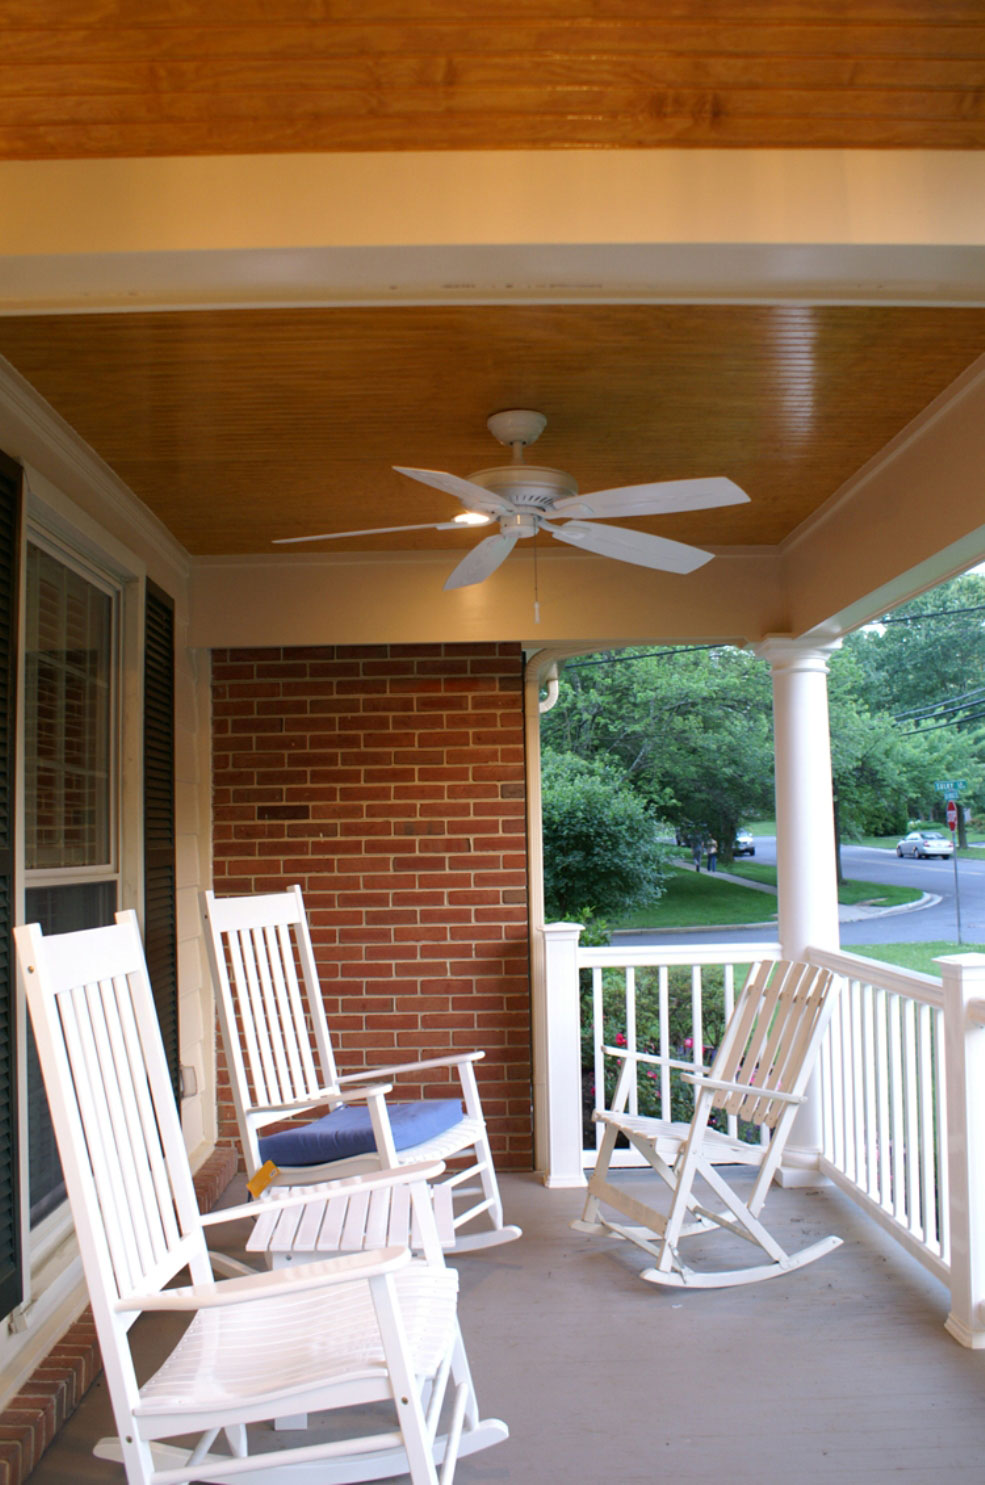 Terrace Featured White Narrow Terrace Featured Super Comfortable White Rocking Chairs Also Beautiful Exterior Ceiling Fans Exterior Exterior Ceiling Fans With Stylish Design